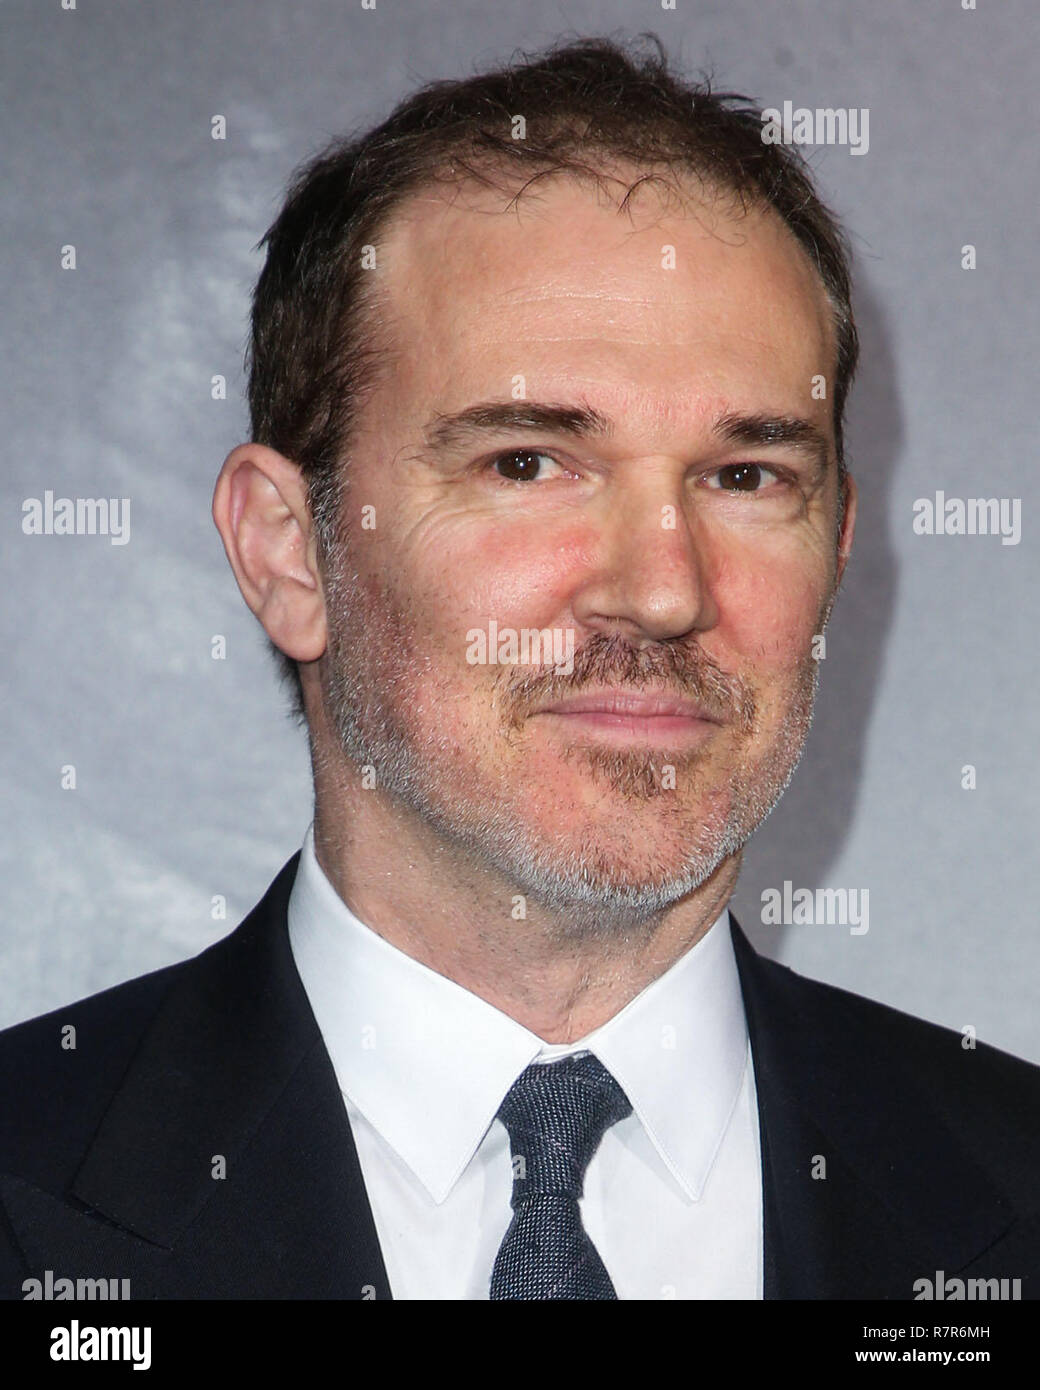 WESTWOOD, LOS ANGELES, CA, USA - DECEMBER 10: Actor Loren Dean arrives at the Los Angeles Premiere of Warner Bros. Pictures' 'The Mule' held at the Regency Village Theatre on December 10, 2018 in Westwood, Los Angeles, California, United States. (Photo by Image Press Agency) Stock Photo